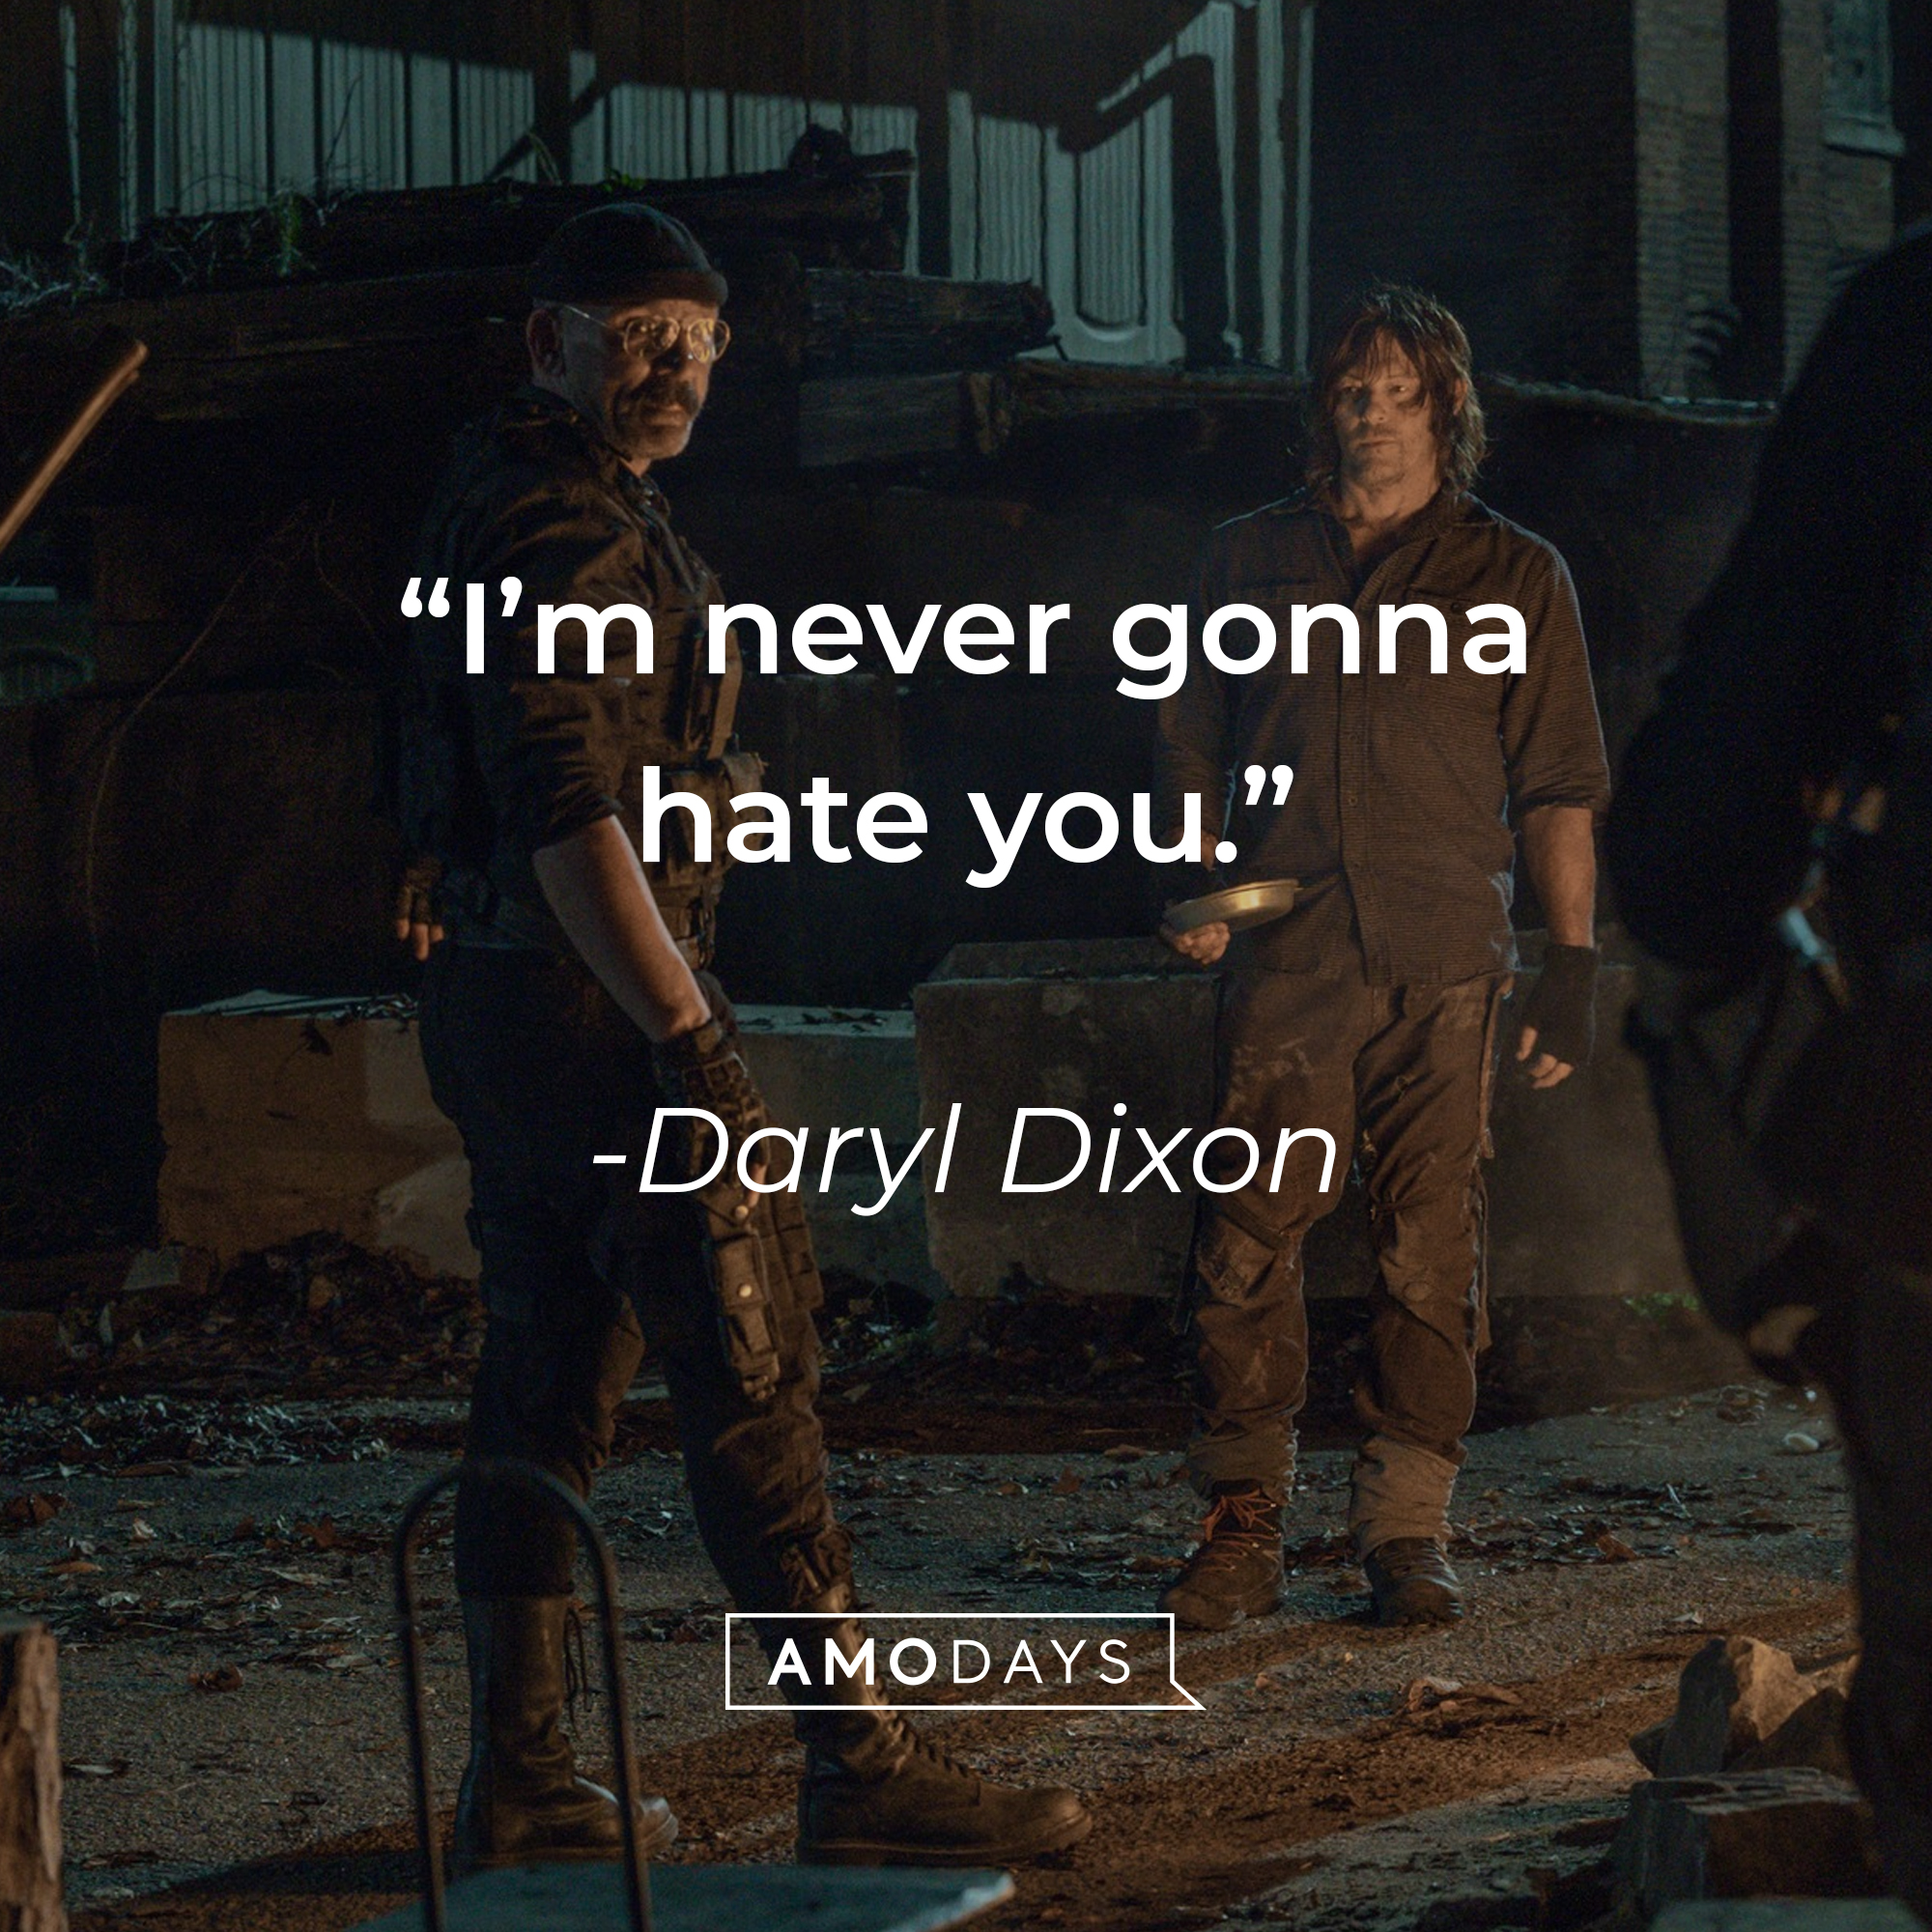 An image of Daryl Dixon with his quote: “I’m never gonna hate you.” | Source: facebook.com/TheWalkingDeadAMC